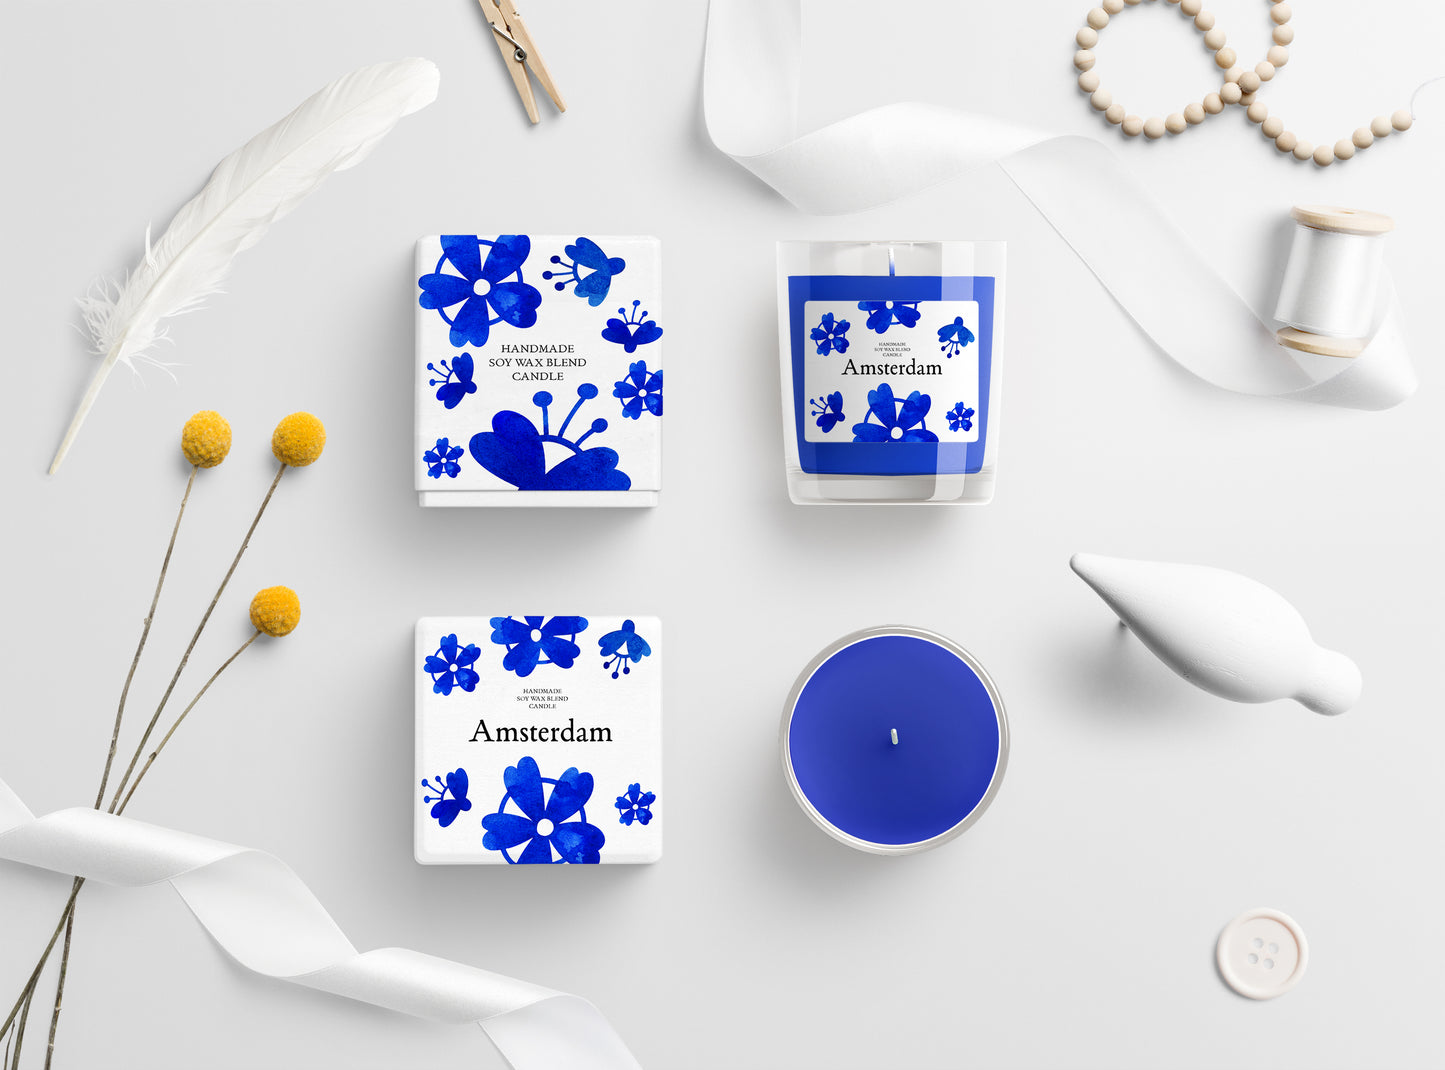 BLUE DELFT Graphic Collection